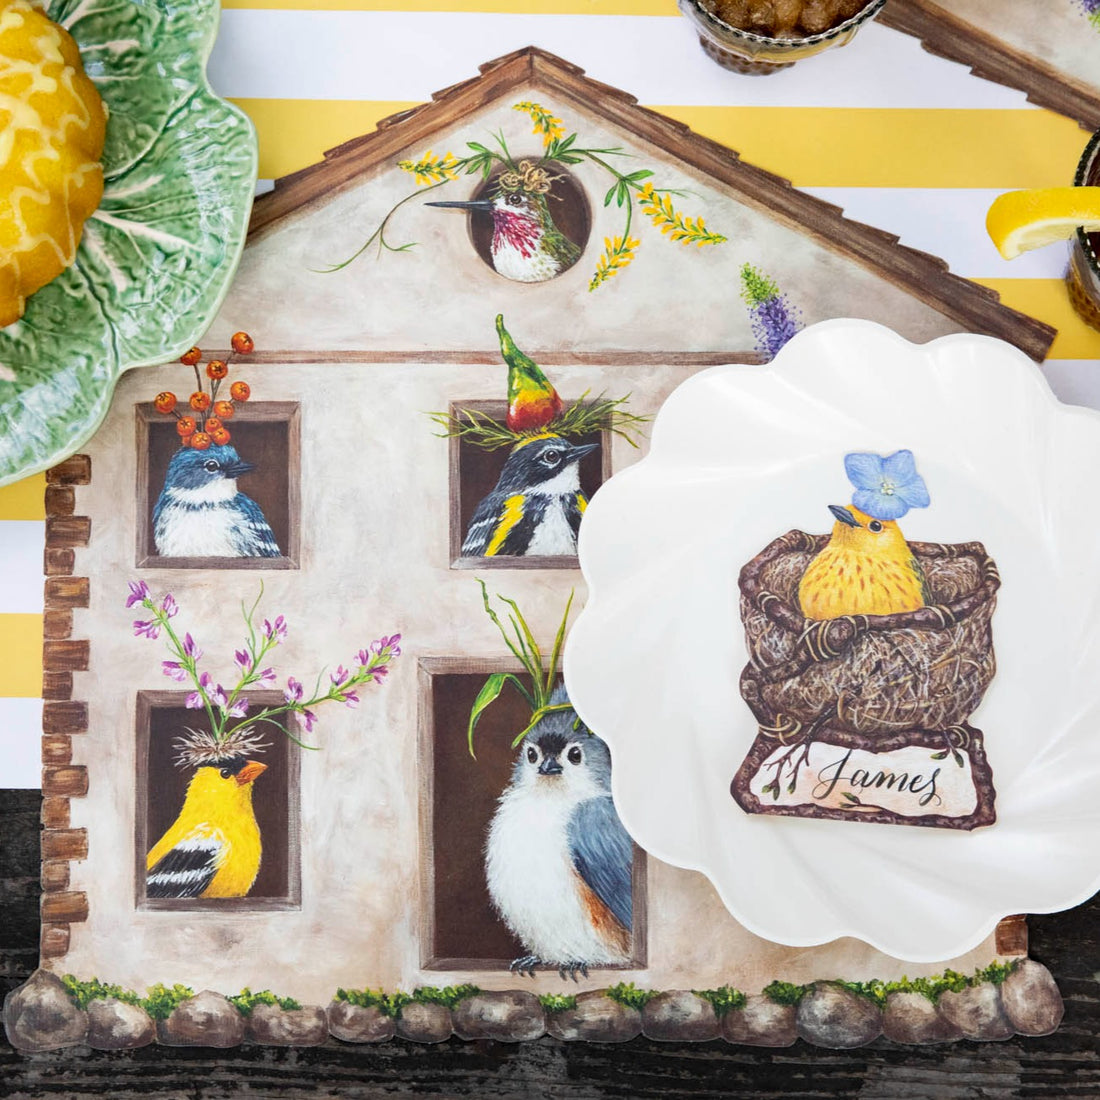 The Die-cut House Party Placemat under an elegant springtime place setting, from above.